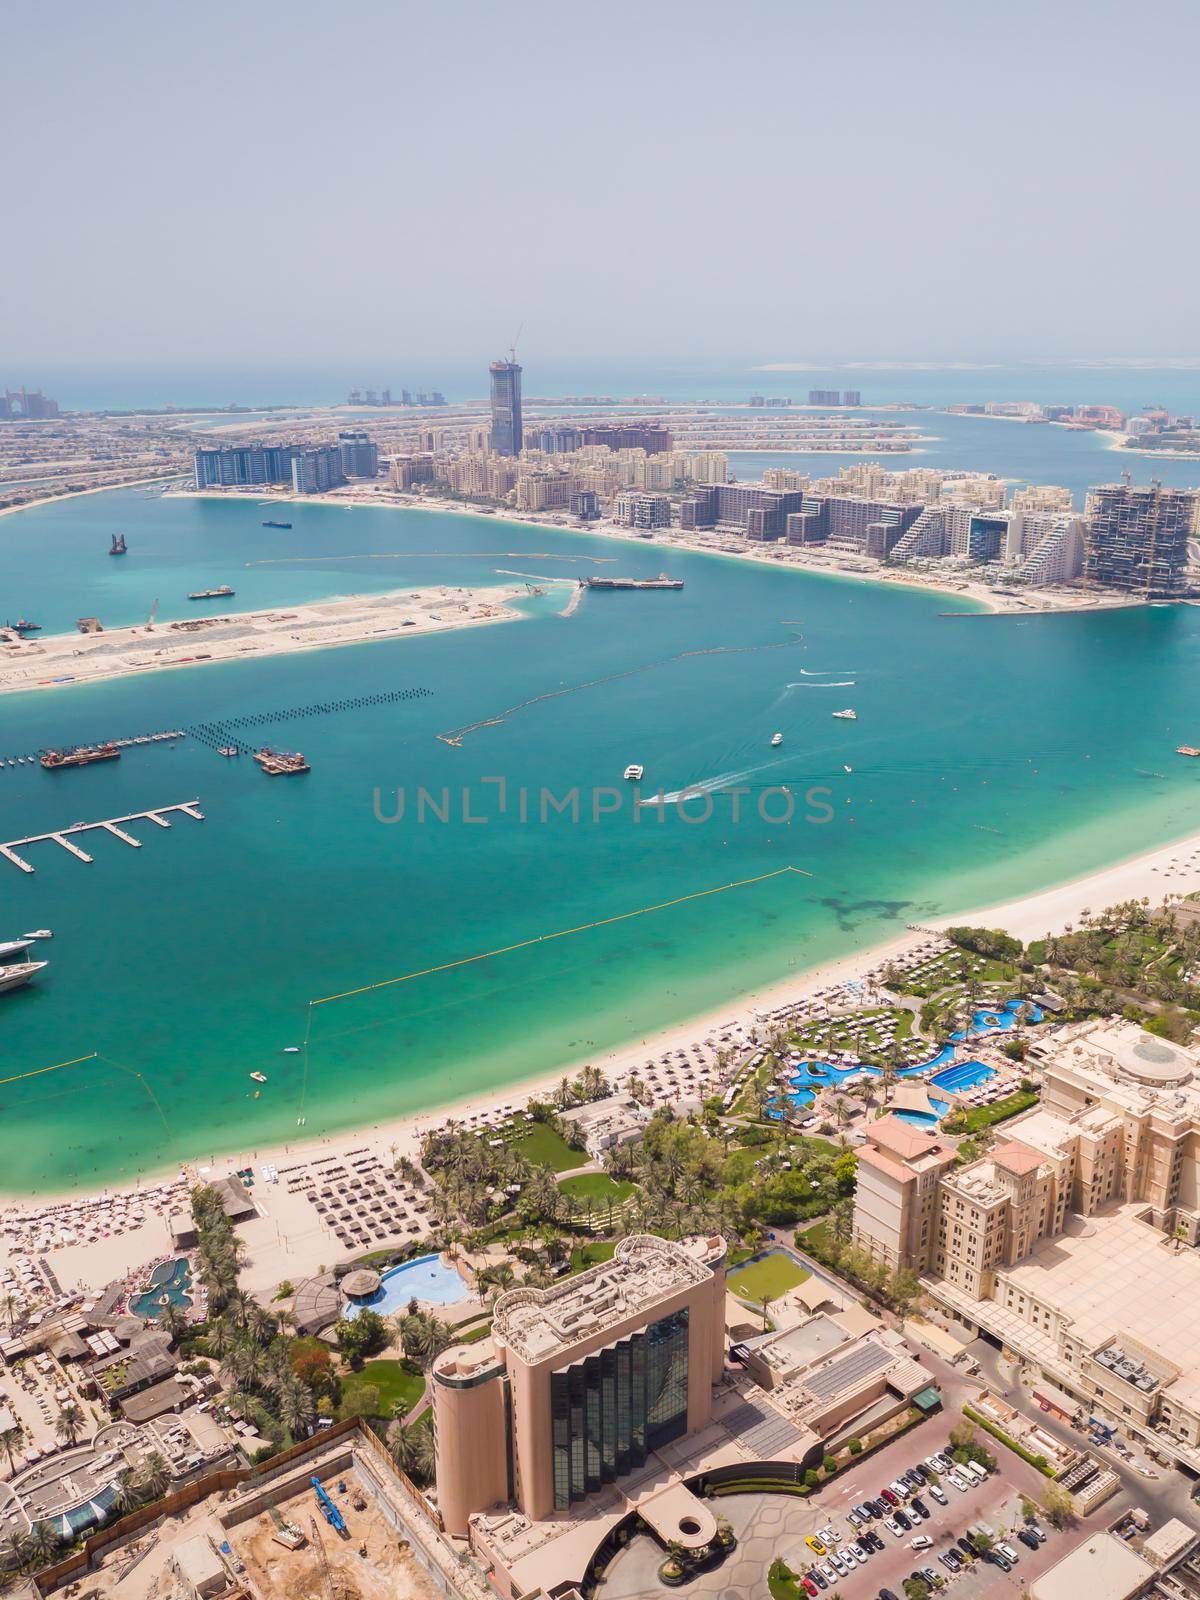 View on residential buildings on Palm Jumeirah island. The Palm Jumeirah is an artificial archipelago in Dubai emirate